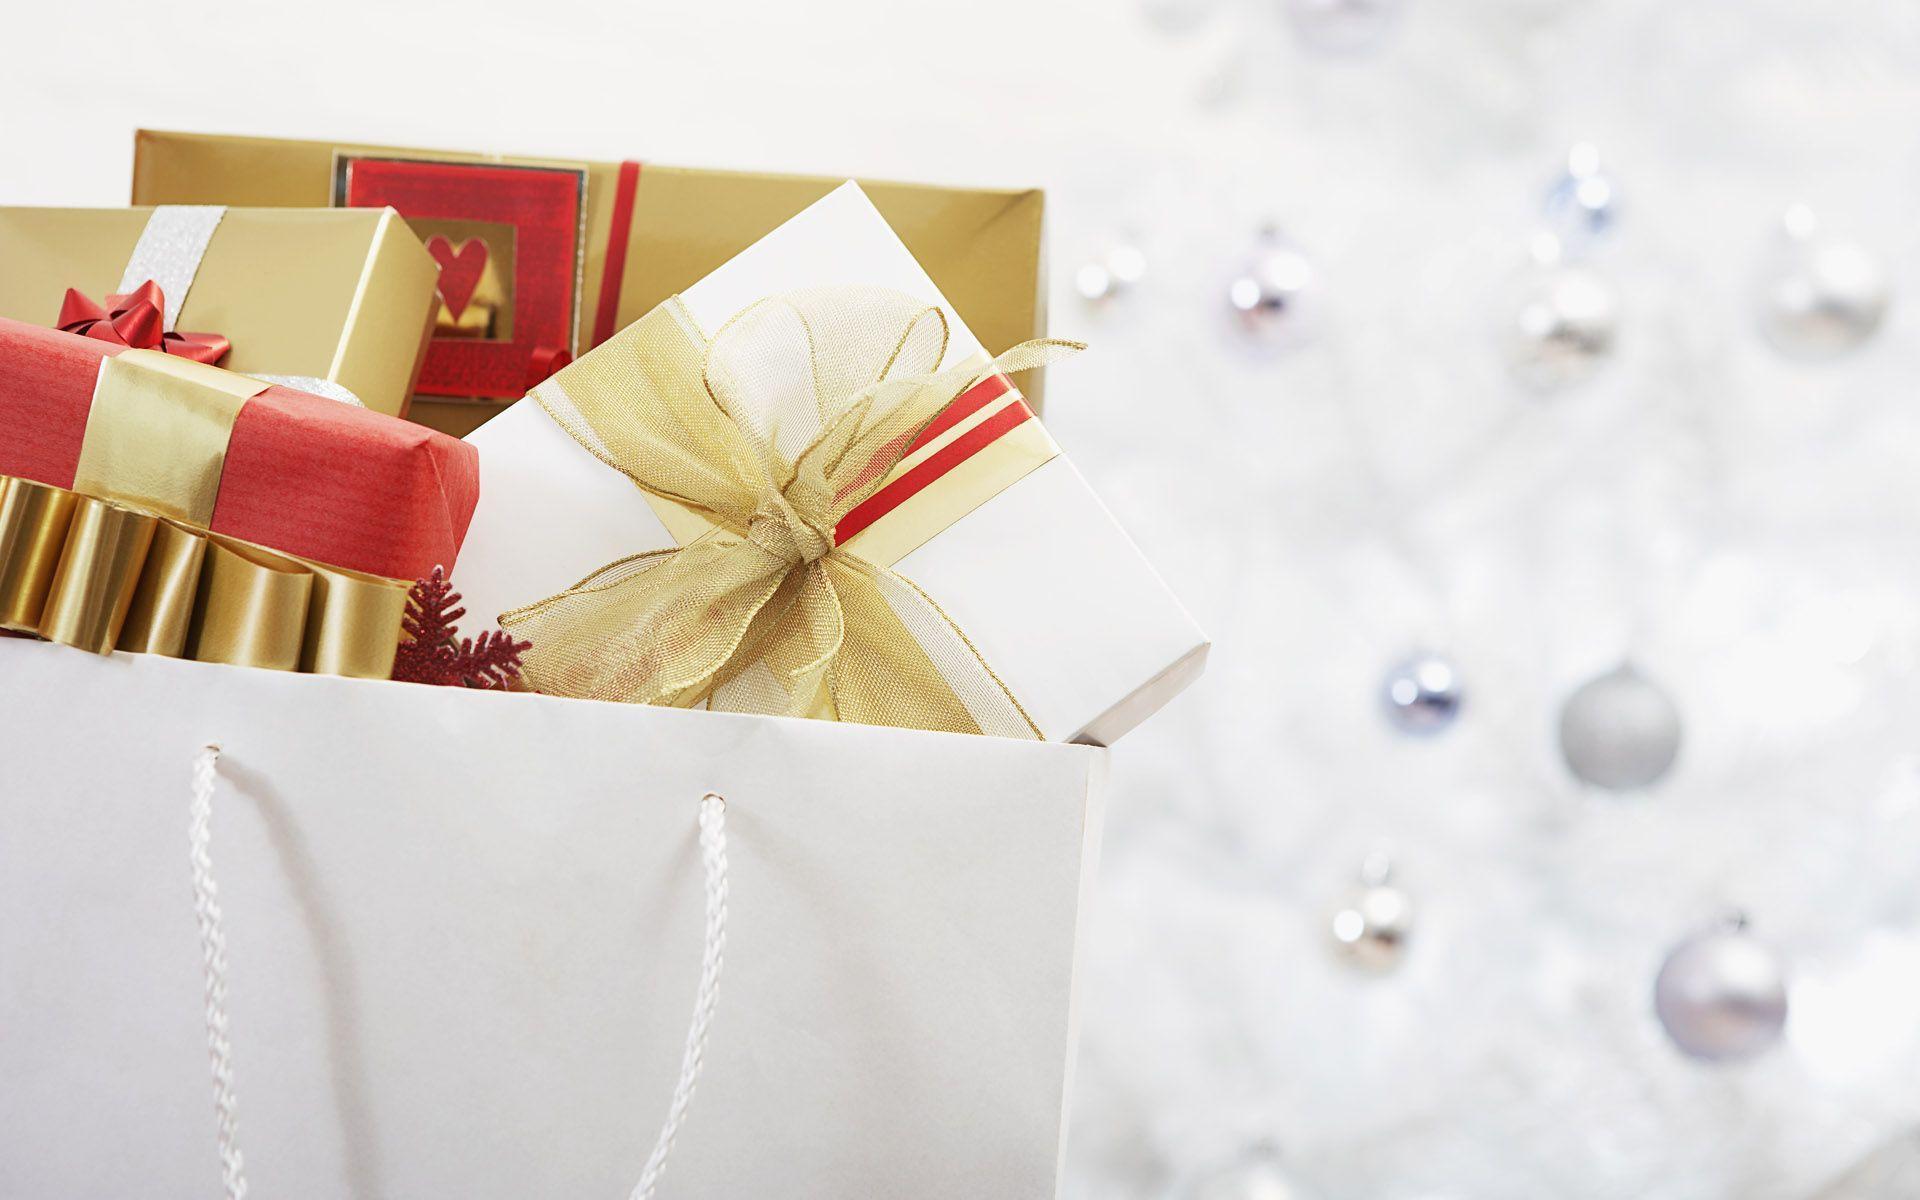 The package of Christmas gifts wallpaper and image